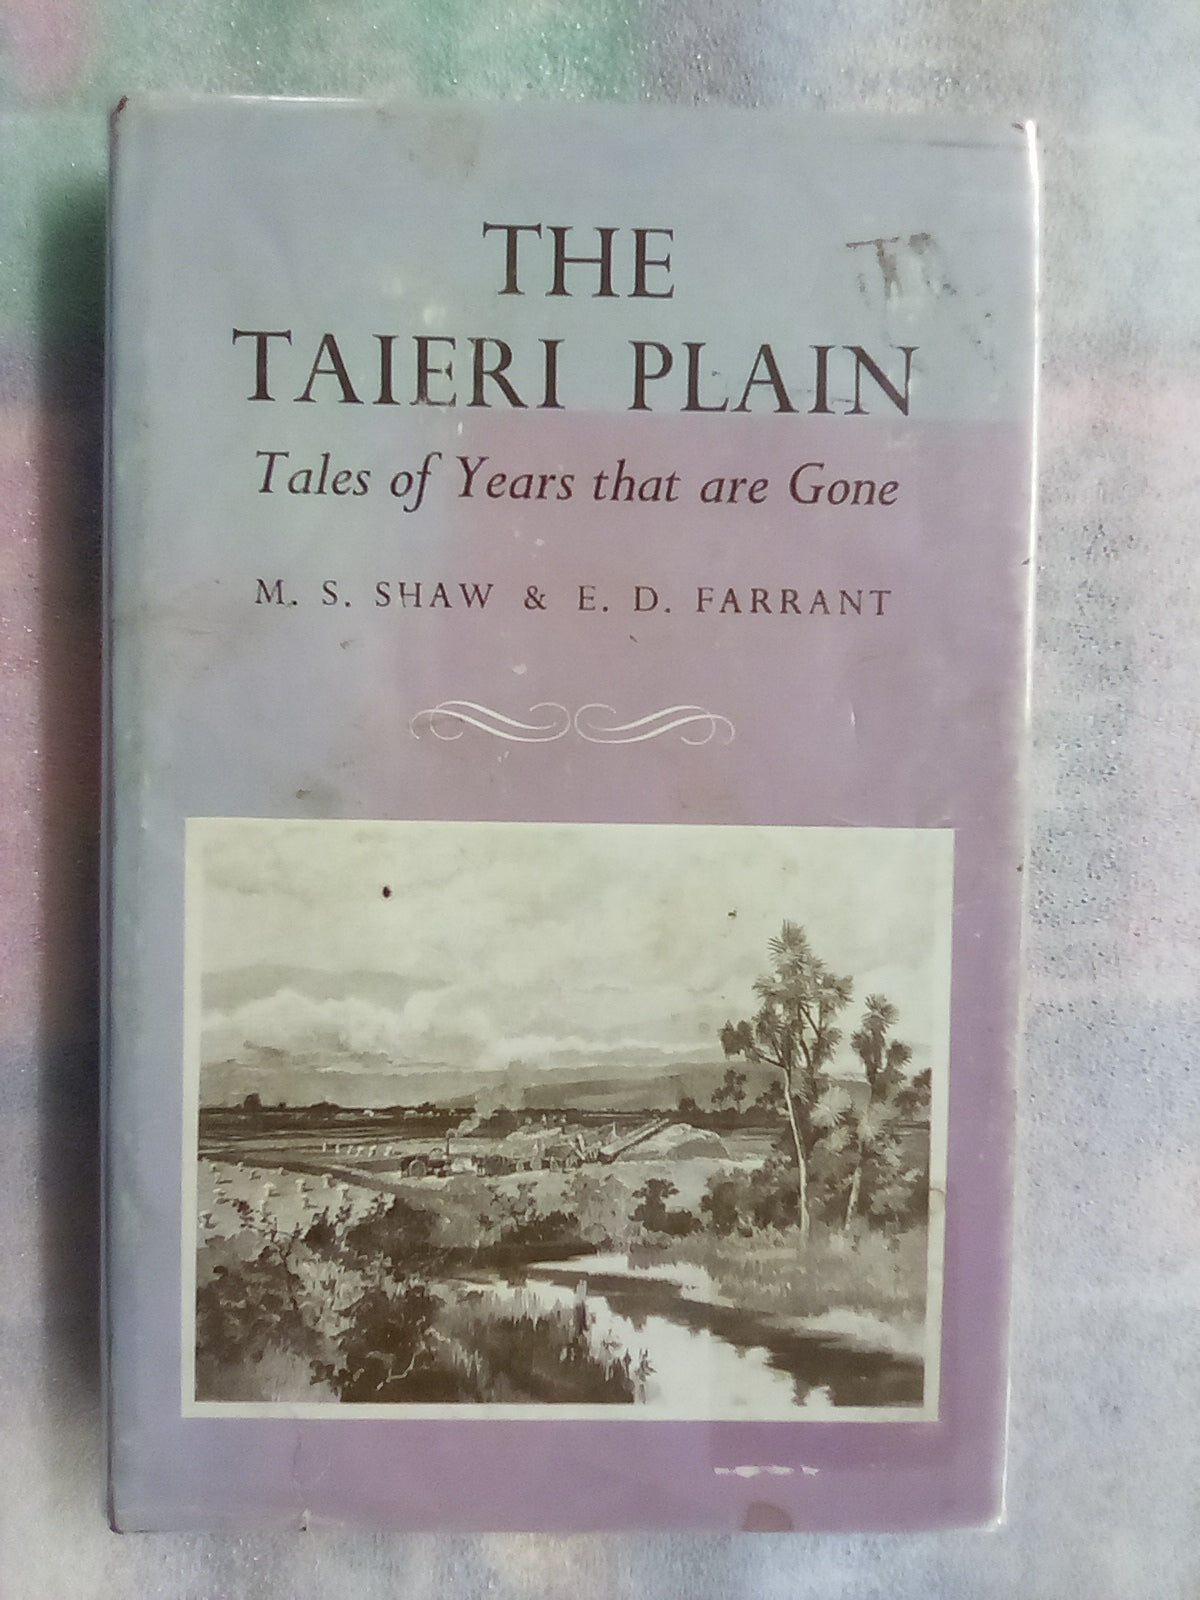 The Taieri Plain - Tales of Years that are Gone